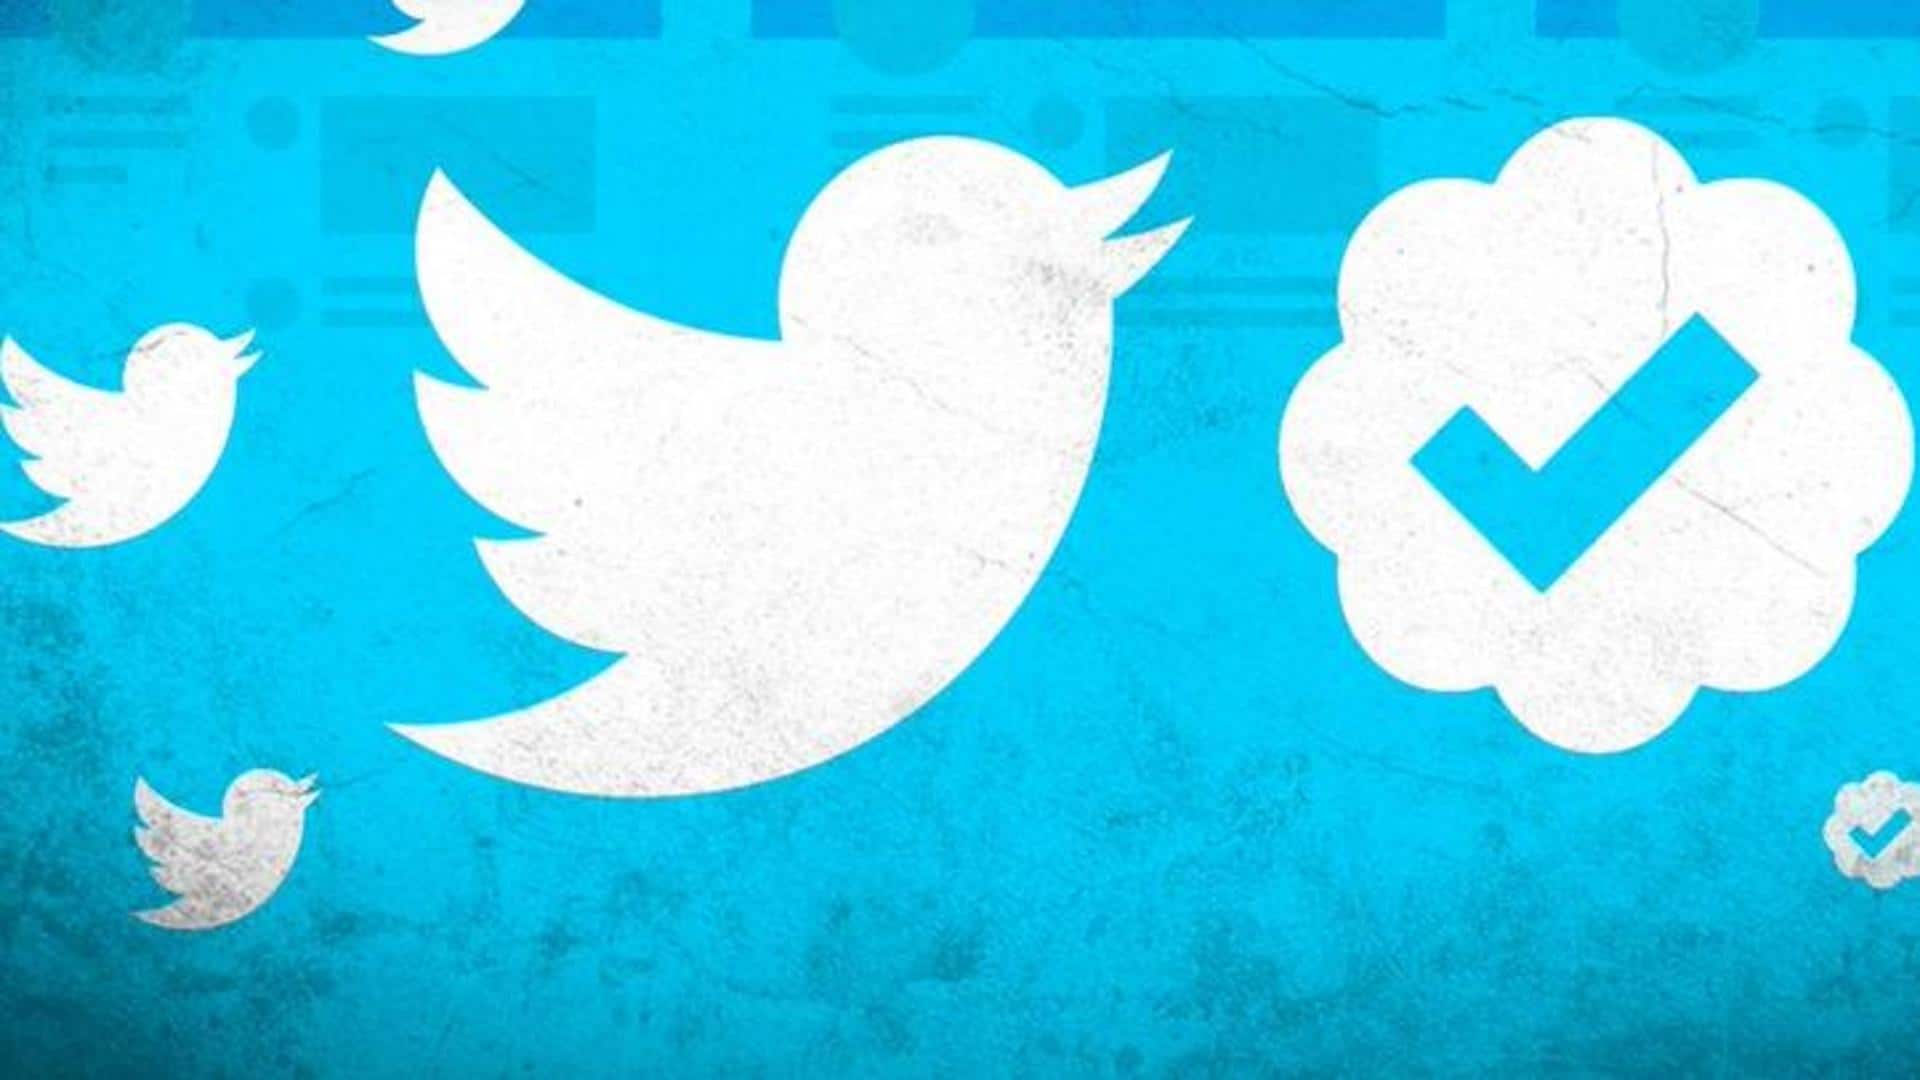 Twitter Blue users can now upload 2-hour long videos